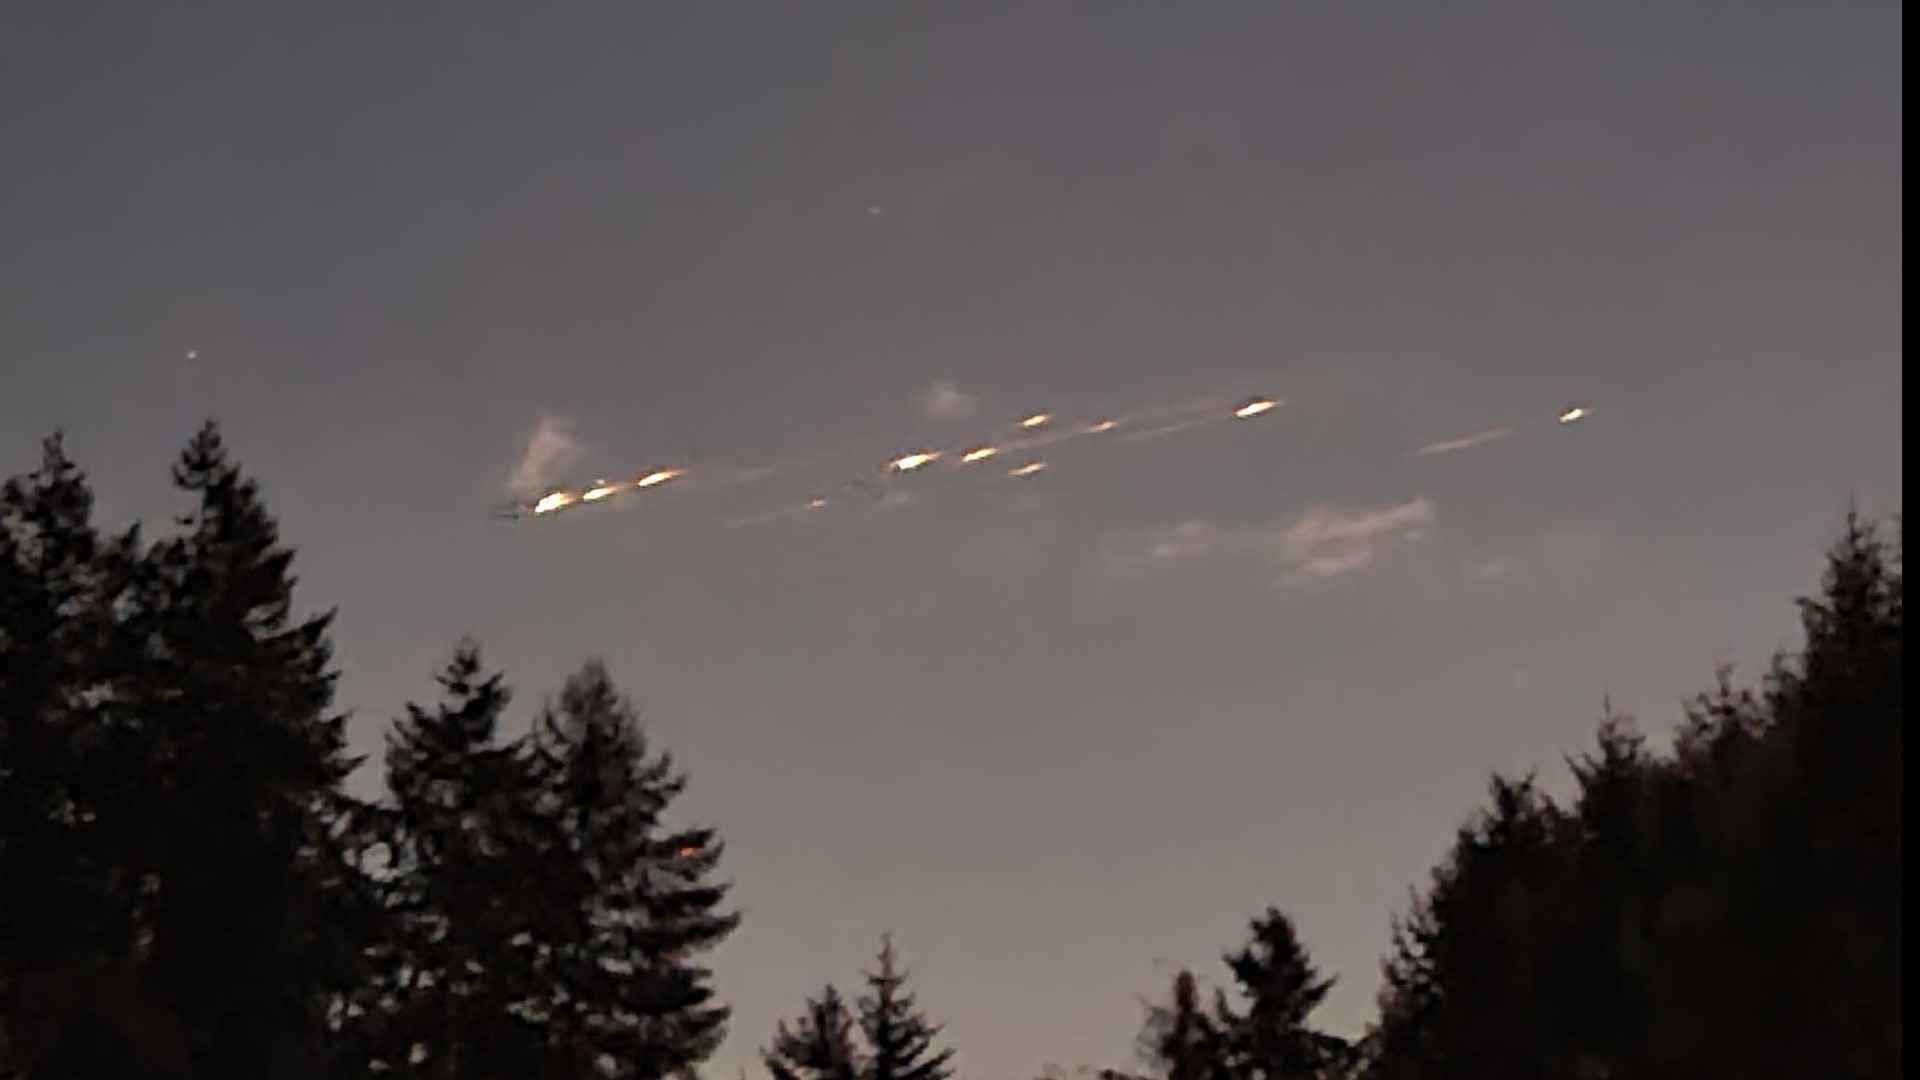 Video shot by KING 5 viewers of the SpaceX rocket debris seen in the night sky on Thursday